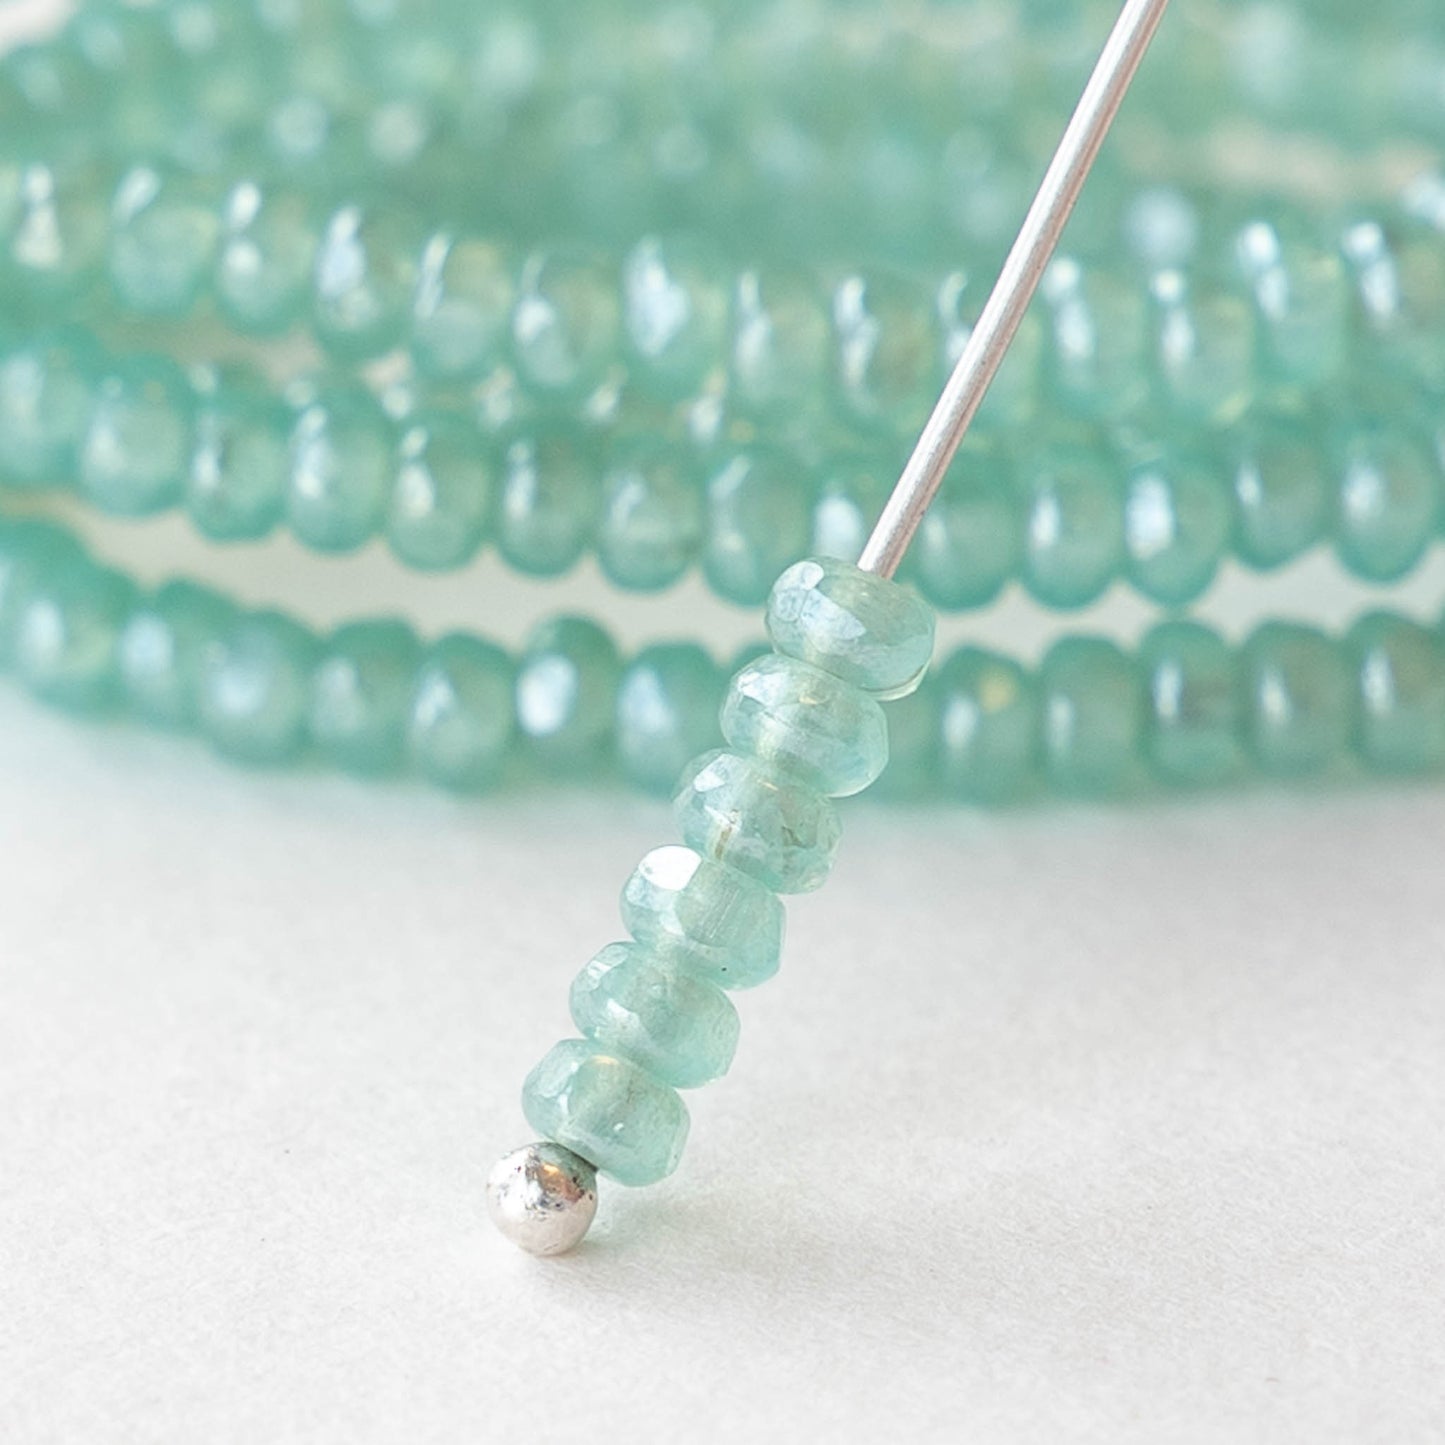 2x3mm Rondelle Beads - Seafoam Luster - 50 Beads